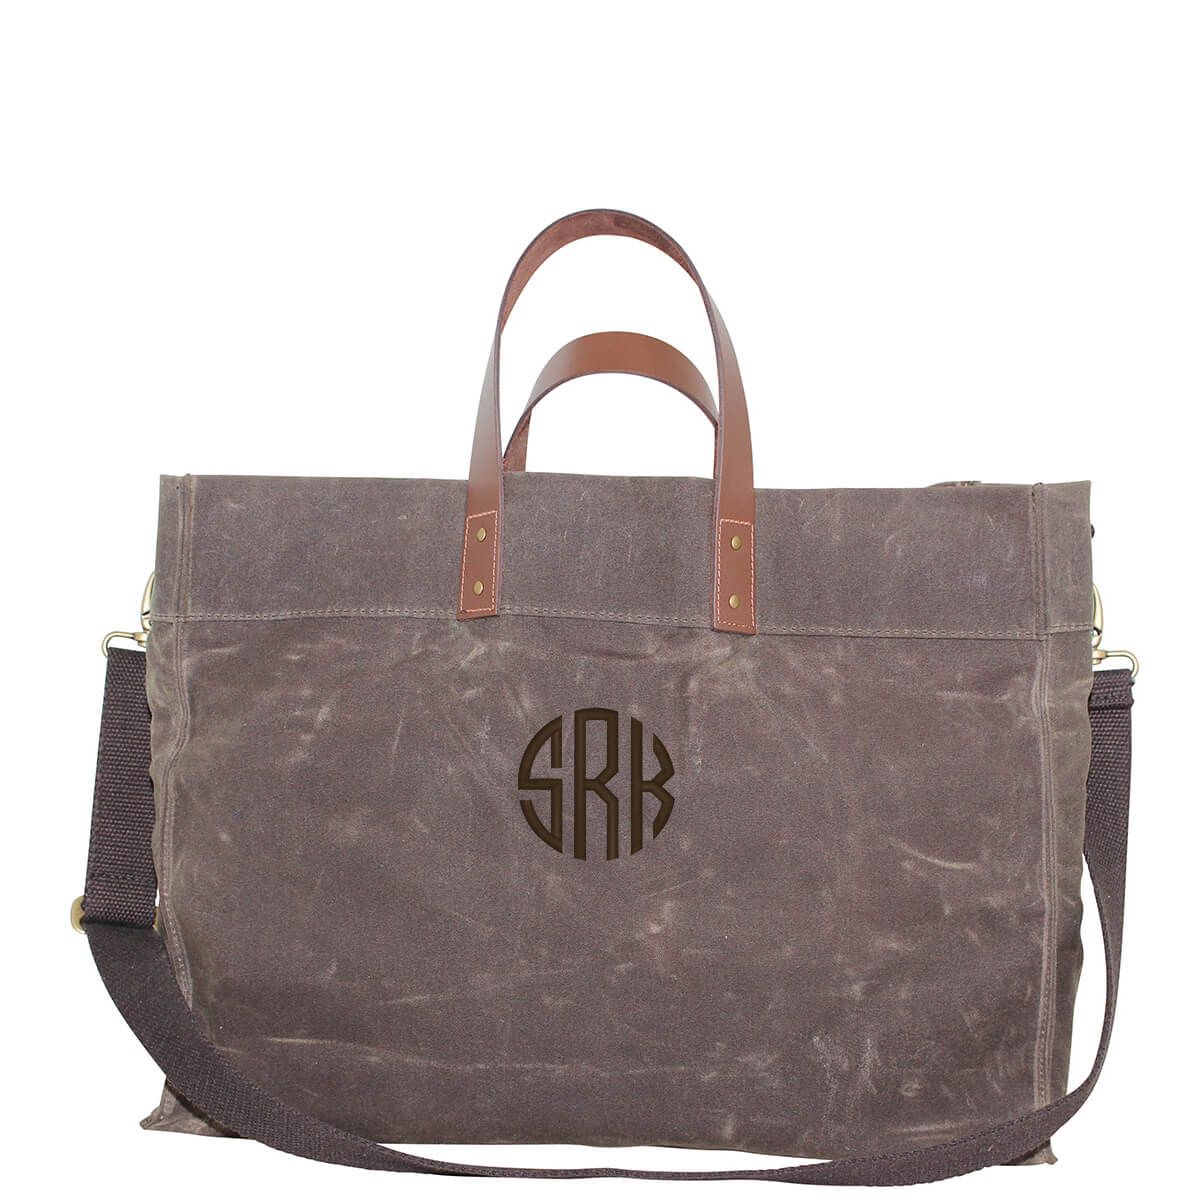 Monogrammed Waxed Canvas Tote Bag Leather Handles Utility Advantage Travel